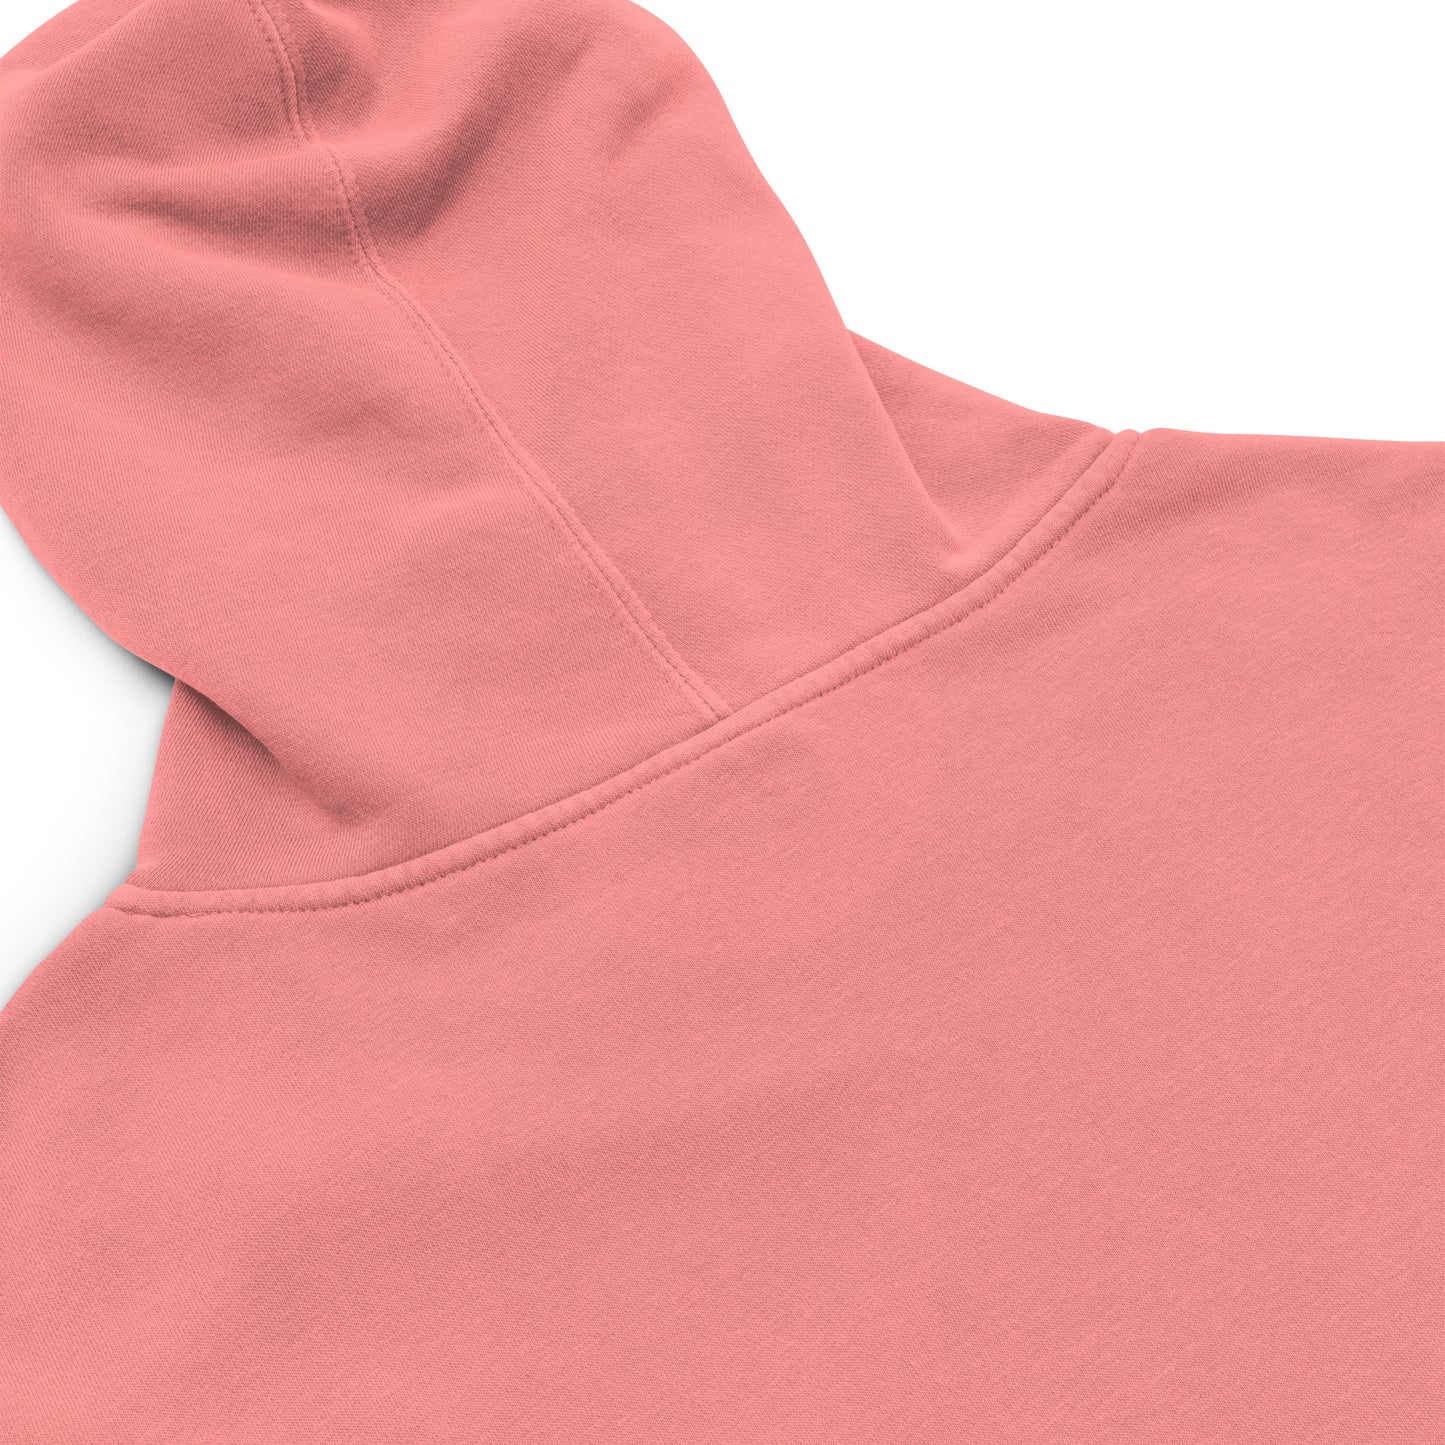 FOH Unisex pigment-dyed hoodie [M.2]